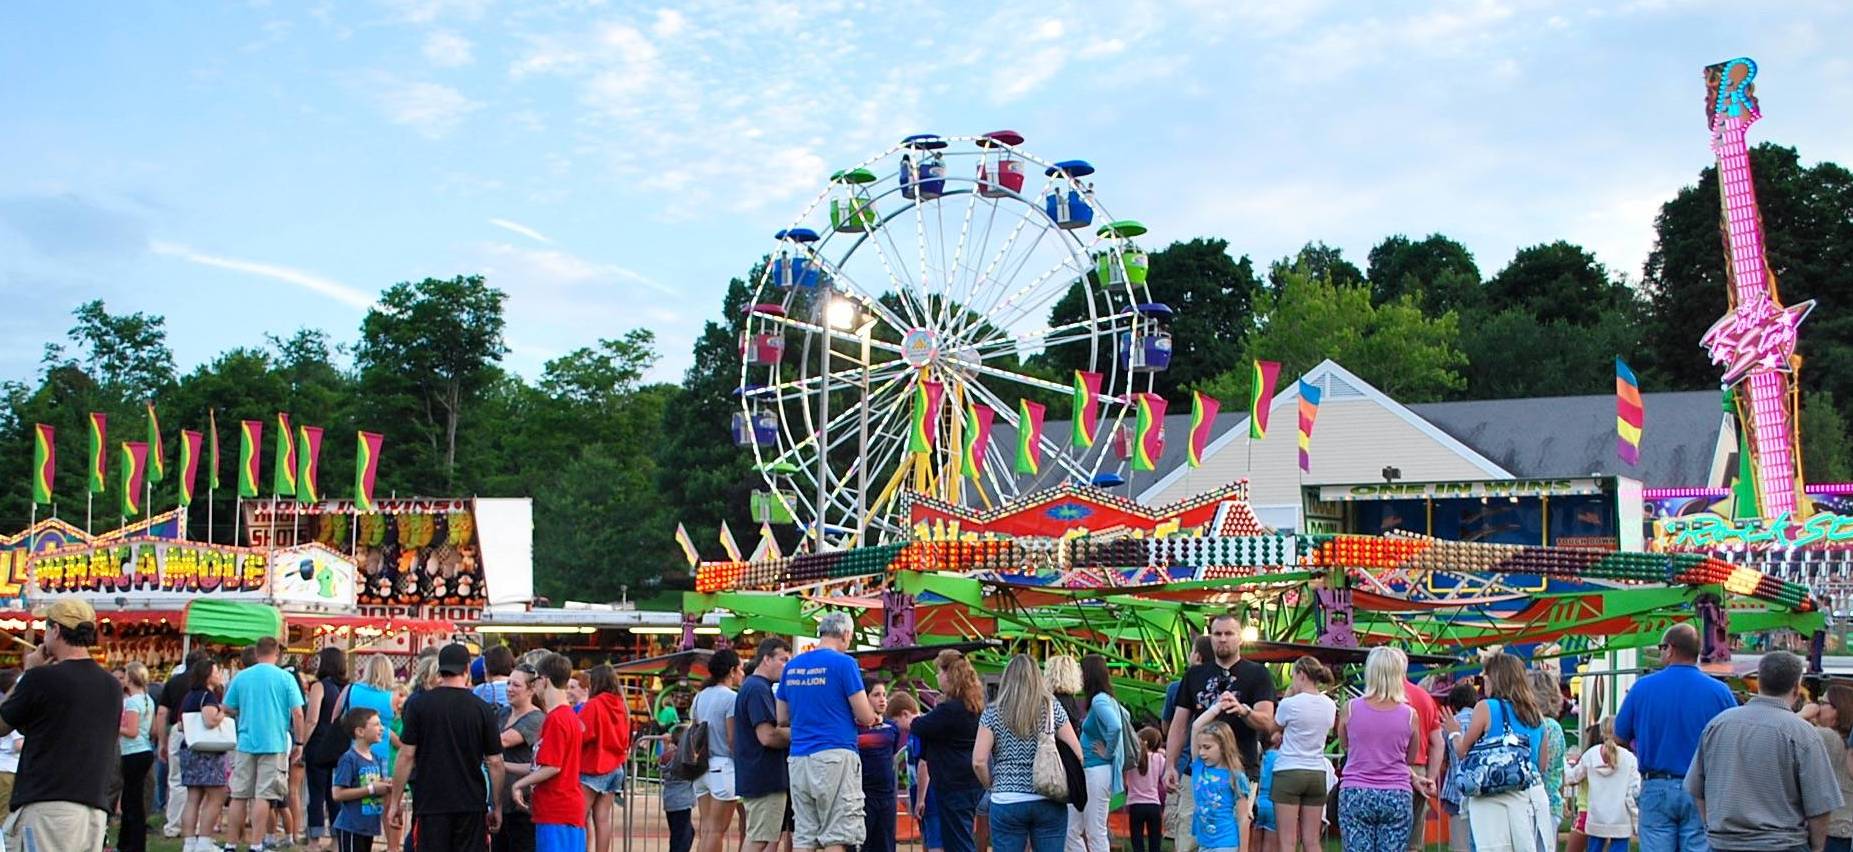 You’re Invited to the New Fairfield Lions Club’s Carnival, Tues, July